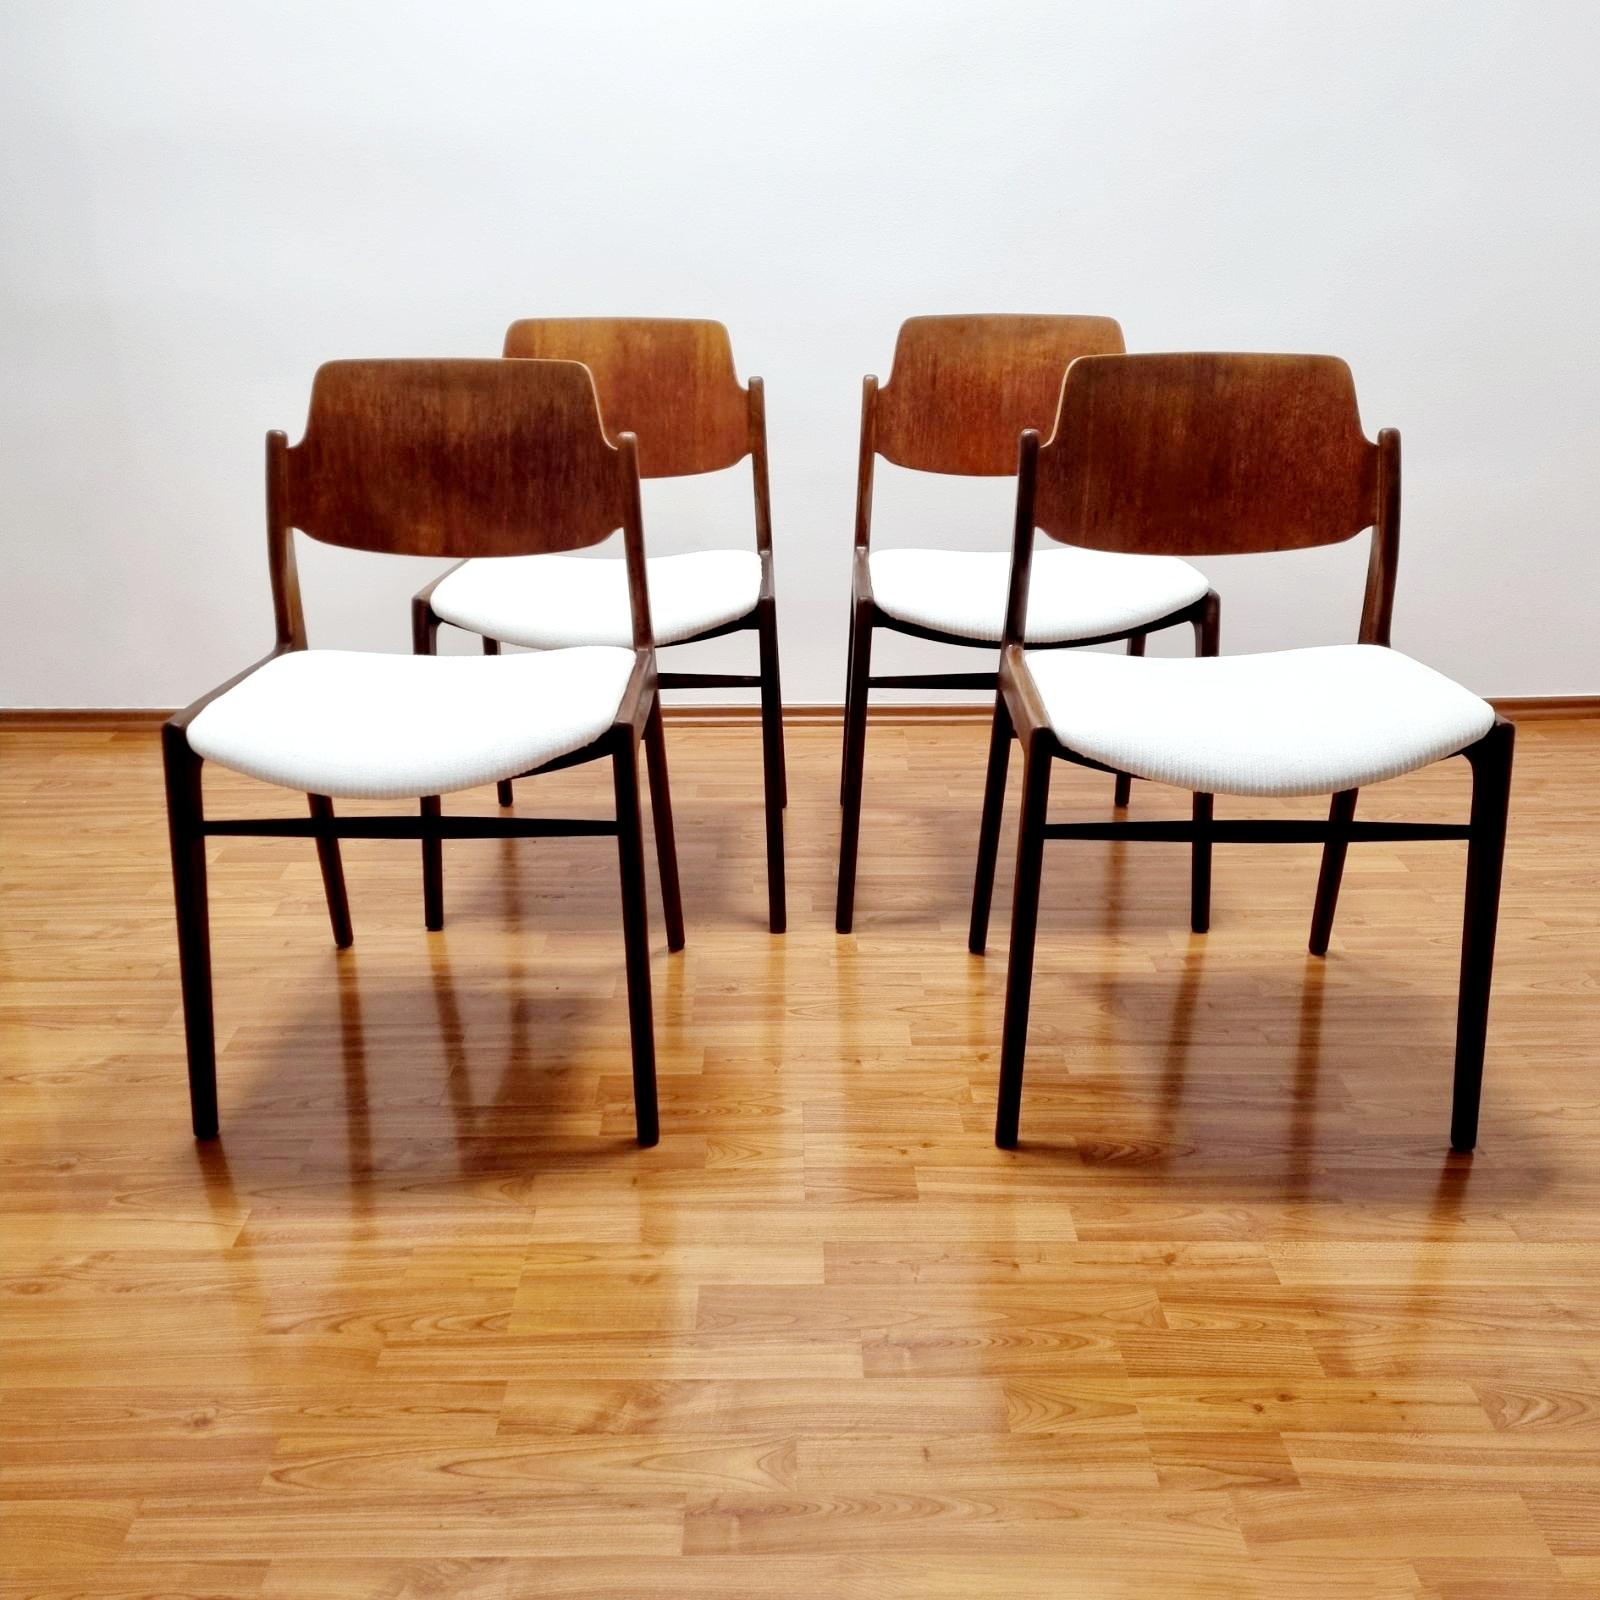 Set of 4 teak dining chairs from the 60s era. Designed by Hartmut Lohmeyer for Wilkhahn.
In verry good condition. The upholstery was recently completly renewed.

Dimensions:
H 79cm, seat height 46 cm
W 49 cm
D 54 cm